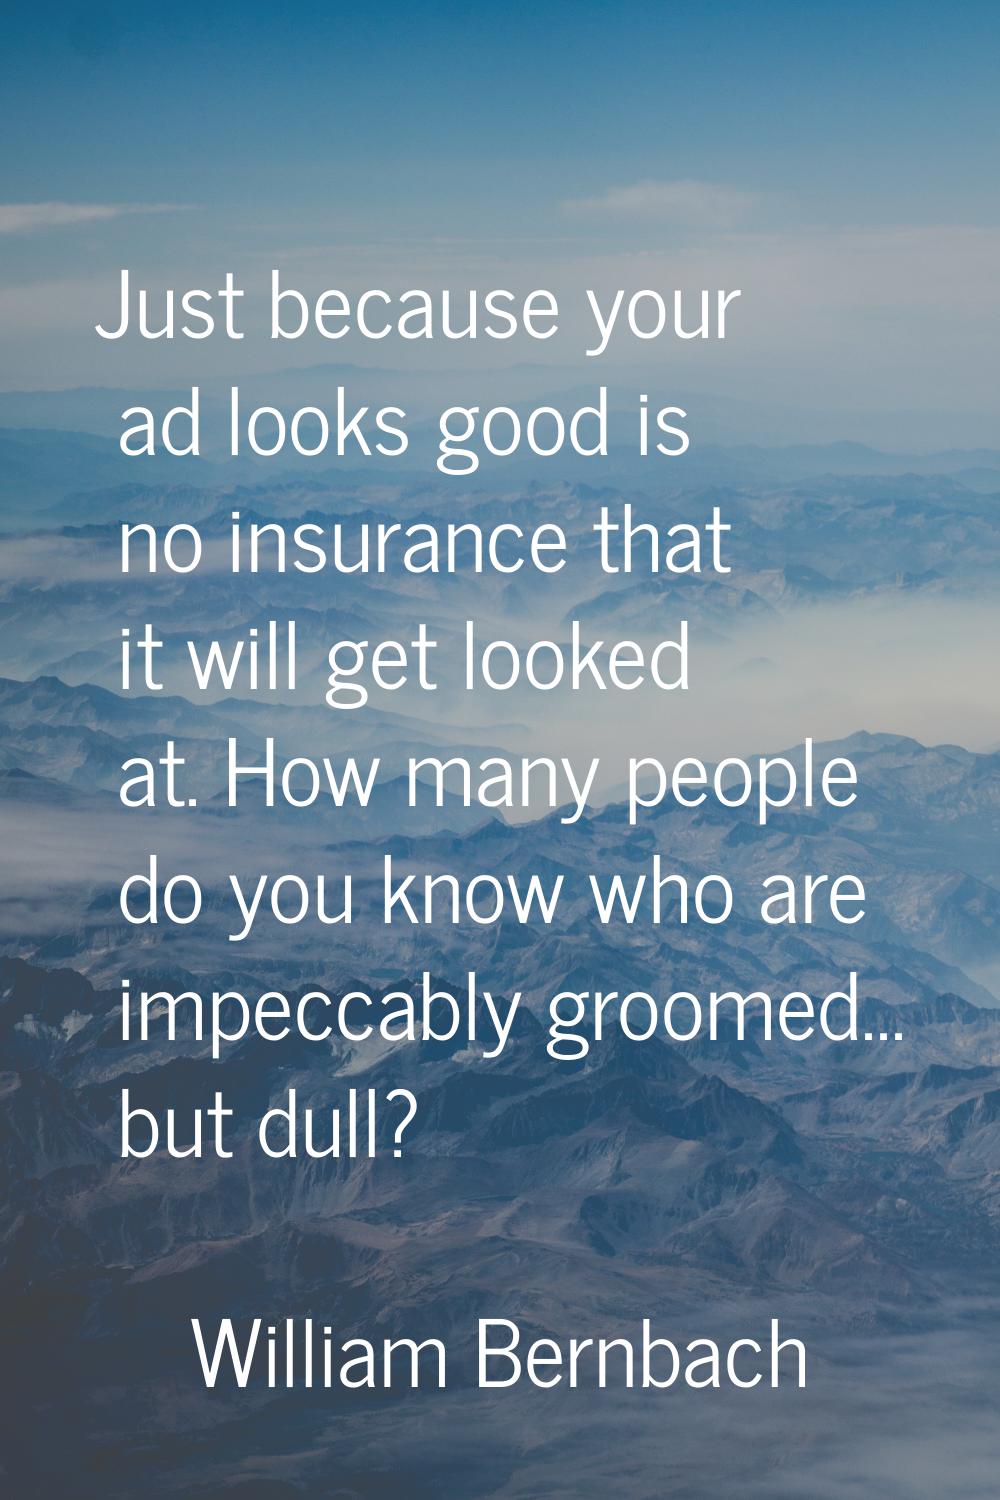 Just because your ad looks good is no insurance that it will get looked at. How many people do you 